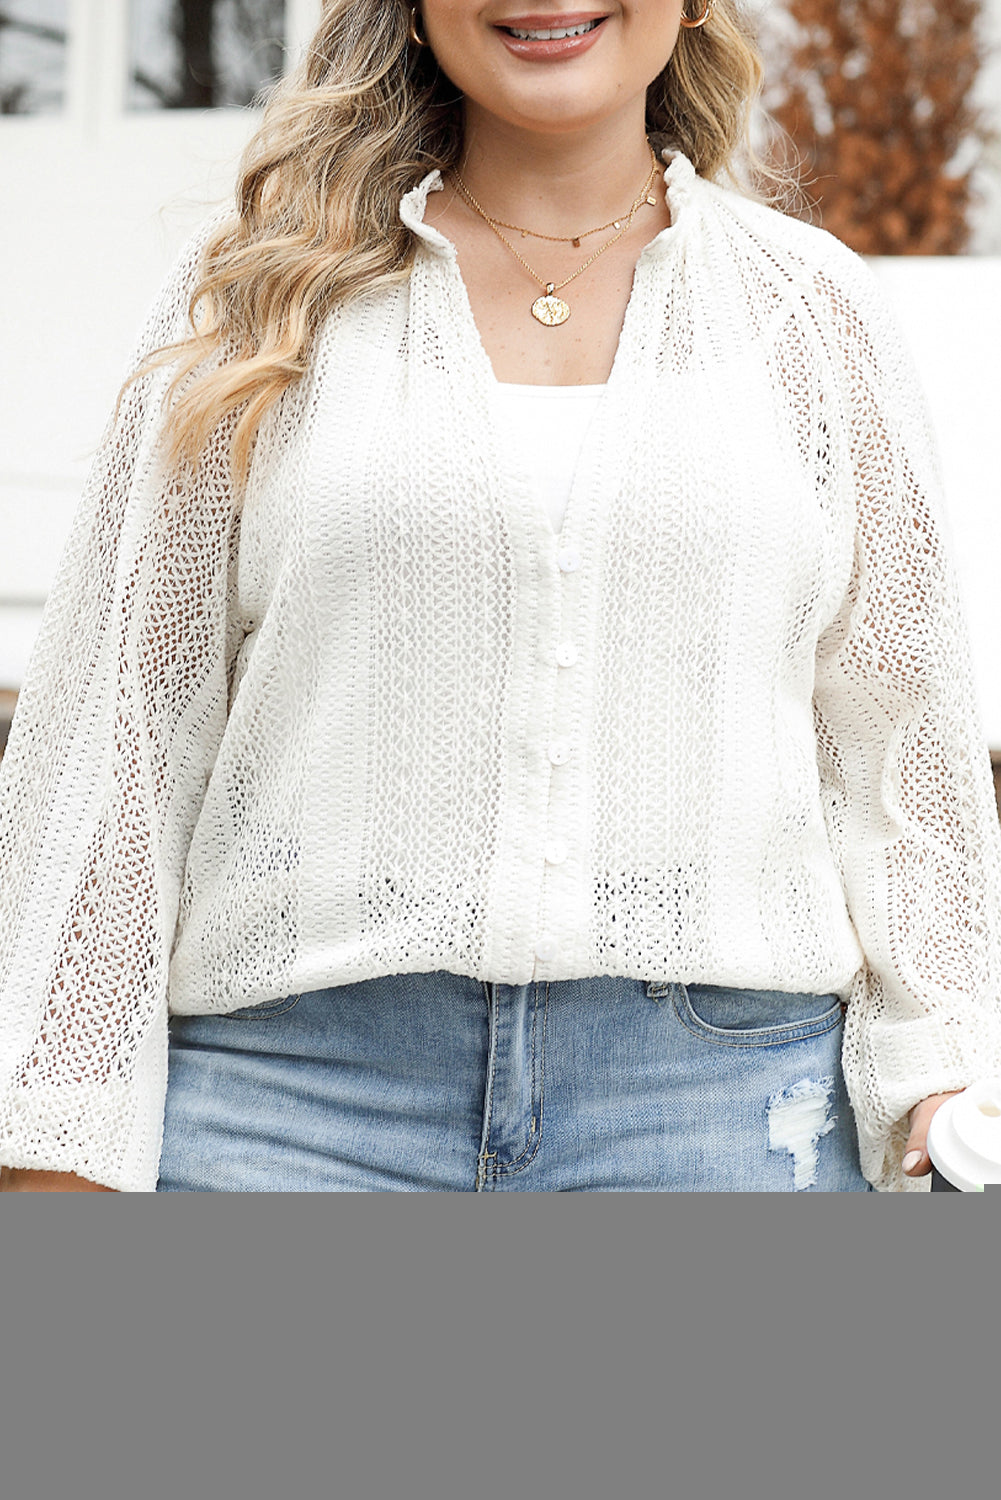 White Plus Size Lace Hollow Out V-Neck Button Up Shirt